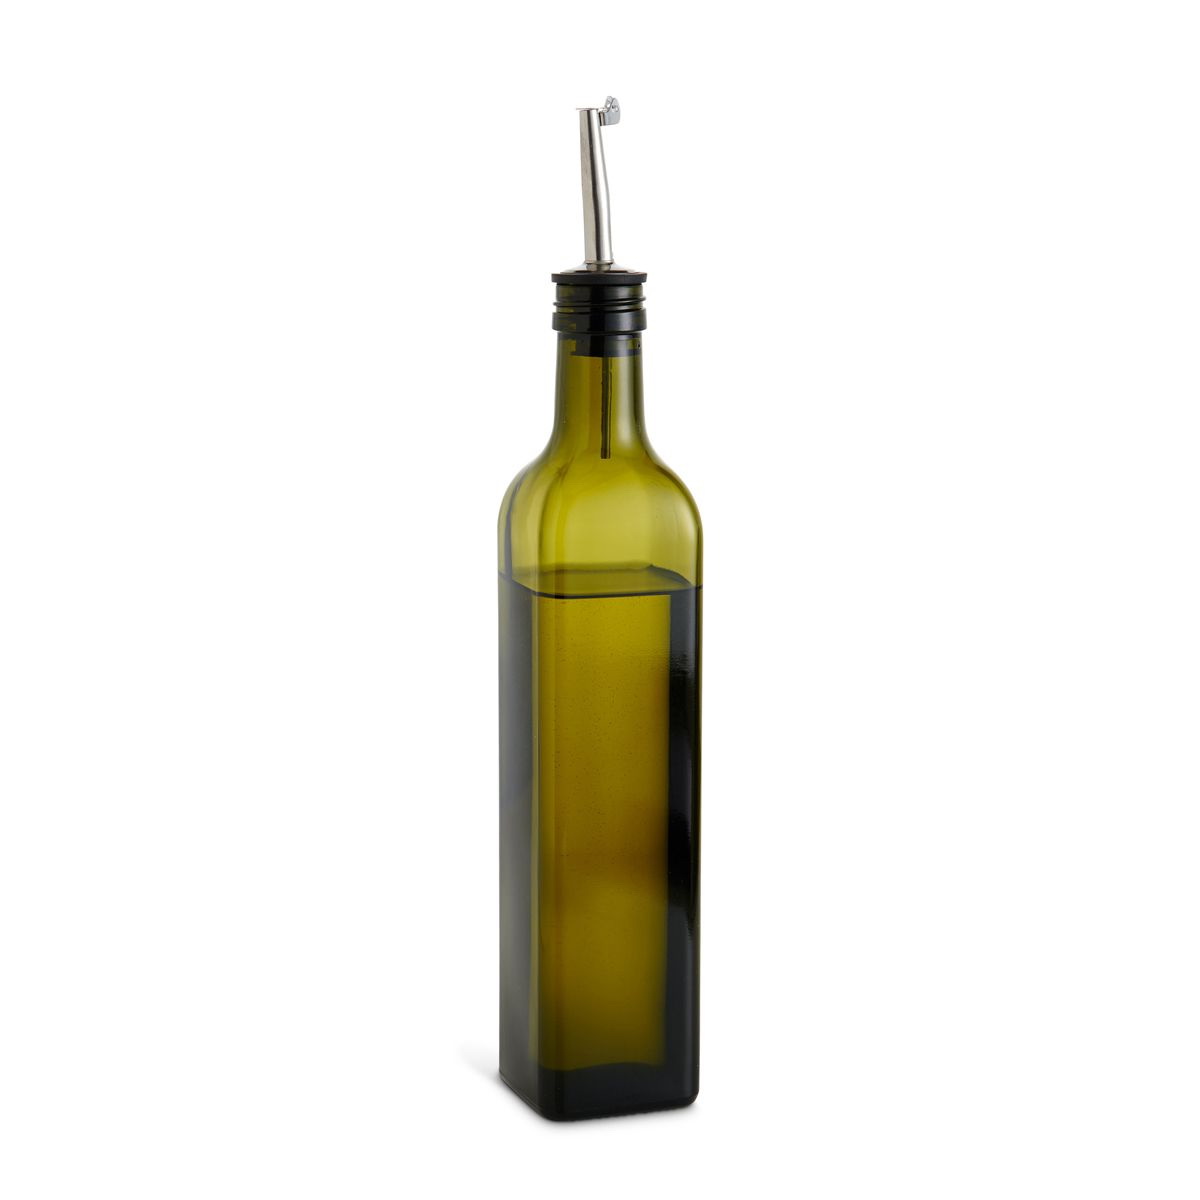 HIC 22152 Cousin Matteo's Olive Oil Bottle with Pourer, 17 oz Capacity, Glass, Green